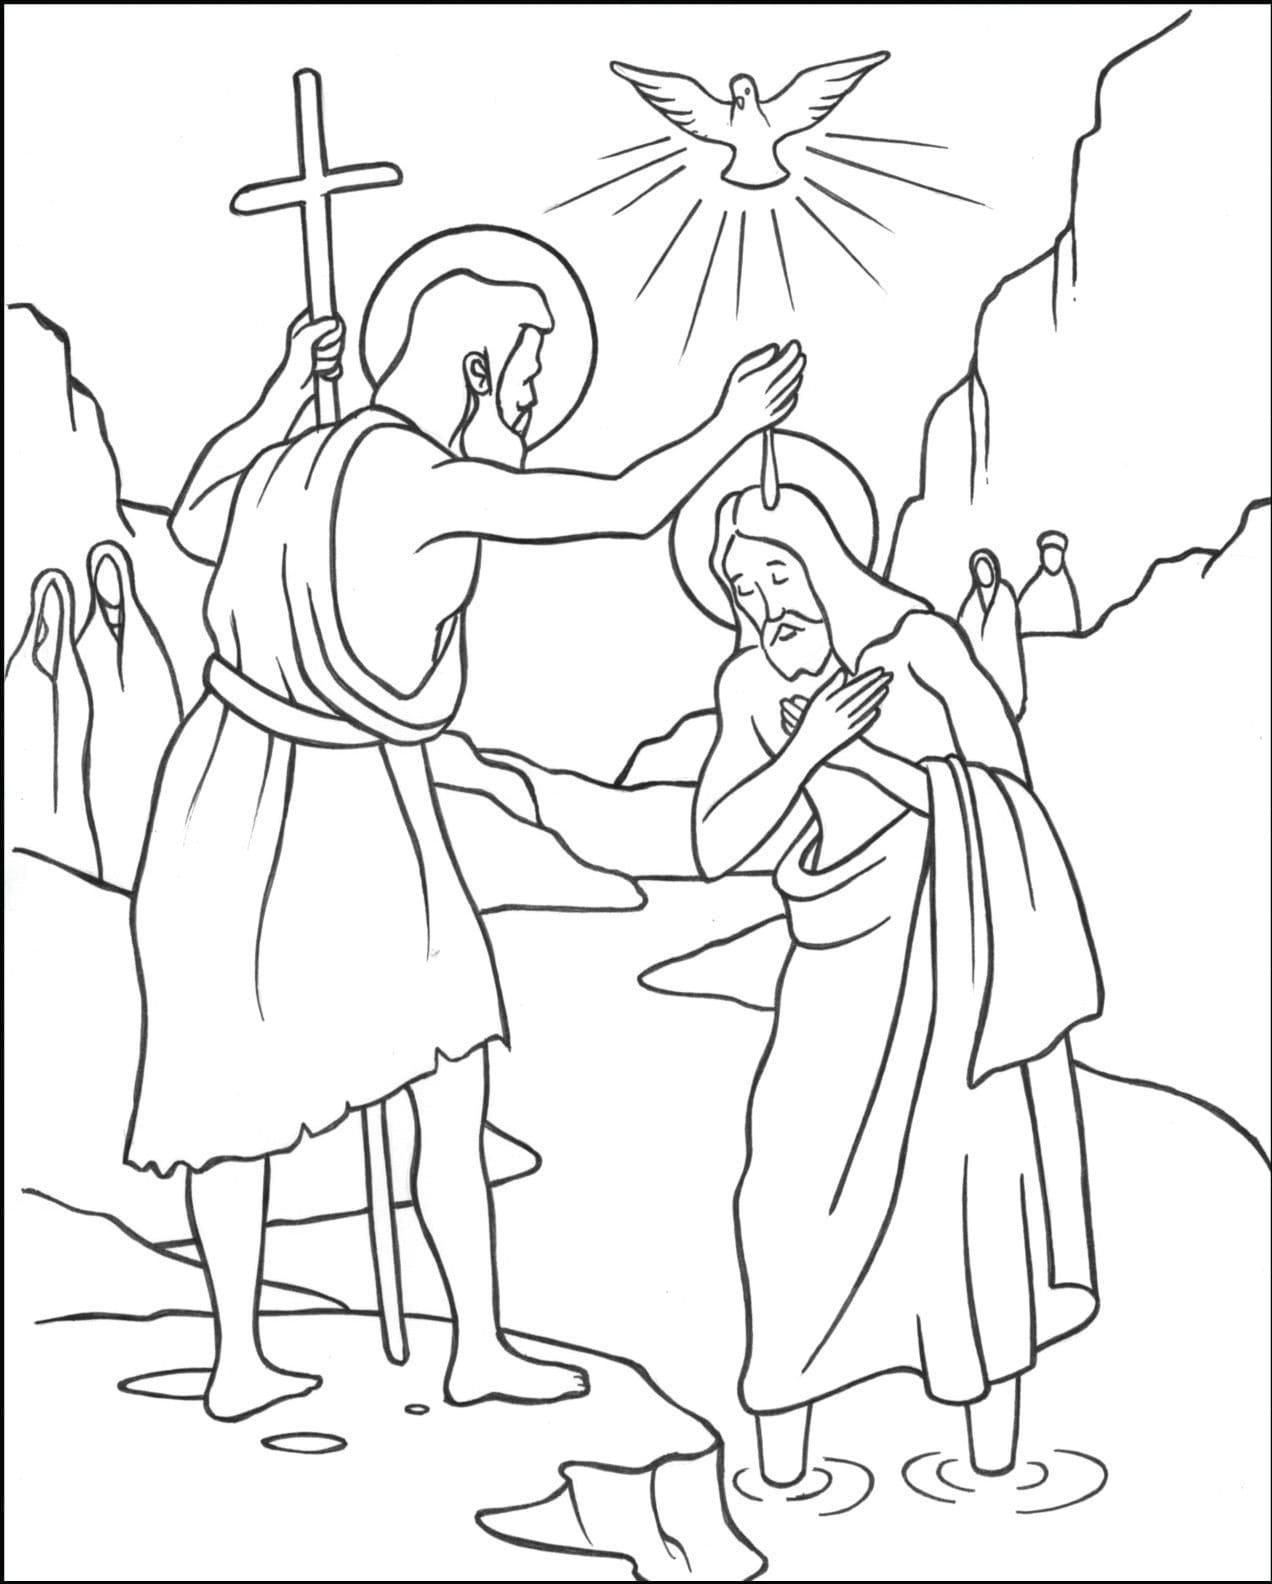 Colorfully glittering jesus baptism coloring page